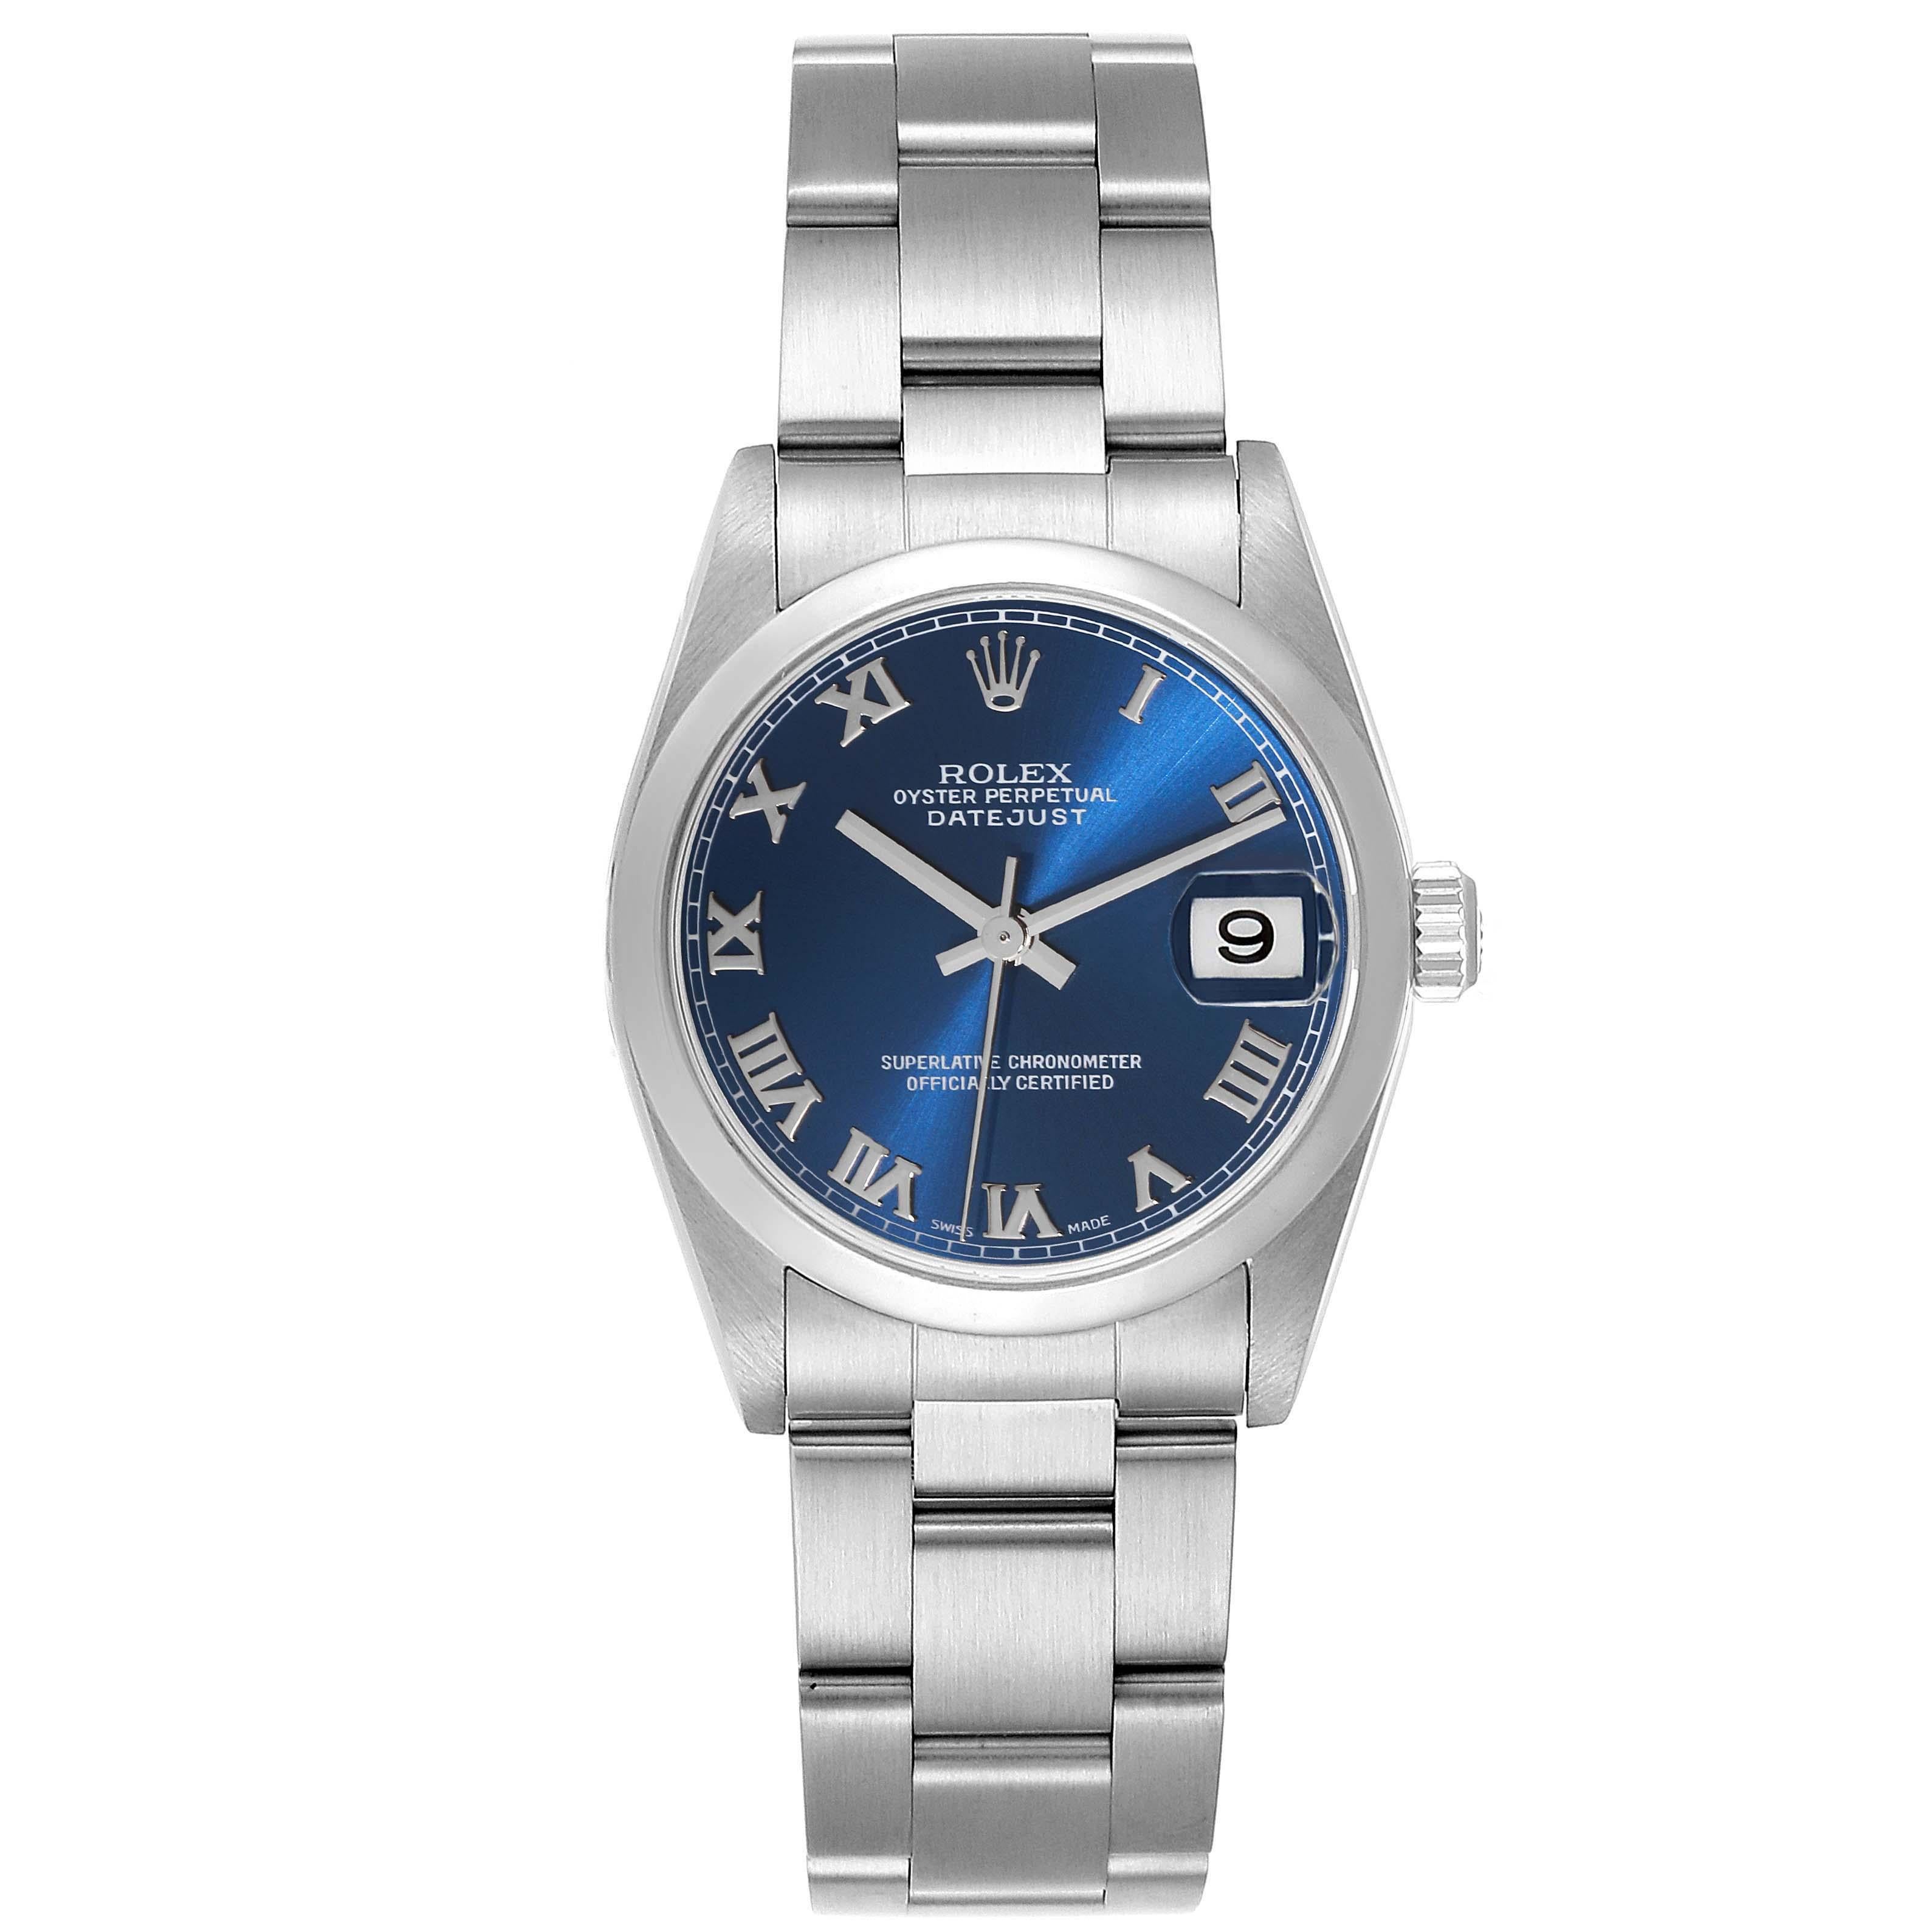 Rolex Datejust 31 Midsize Blue Roman Dial Steel Ladies Watch 78240. Officially certified chronometer automatic self-winding movement. Stainless steel oyster case 31 mm in diameter. Rolex logo on a crown. Stainless steel smooth domed bezel. Scratch